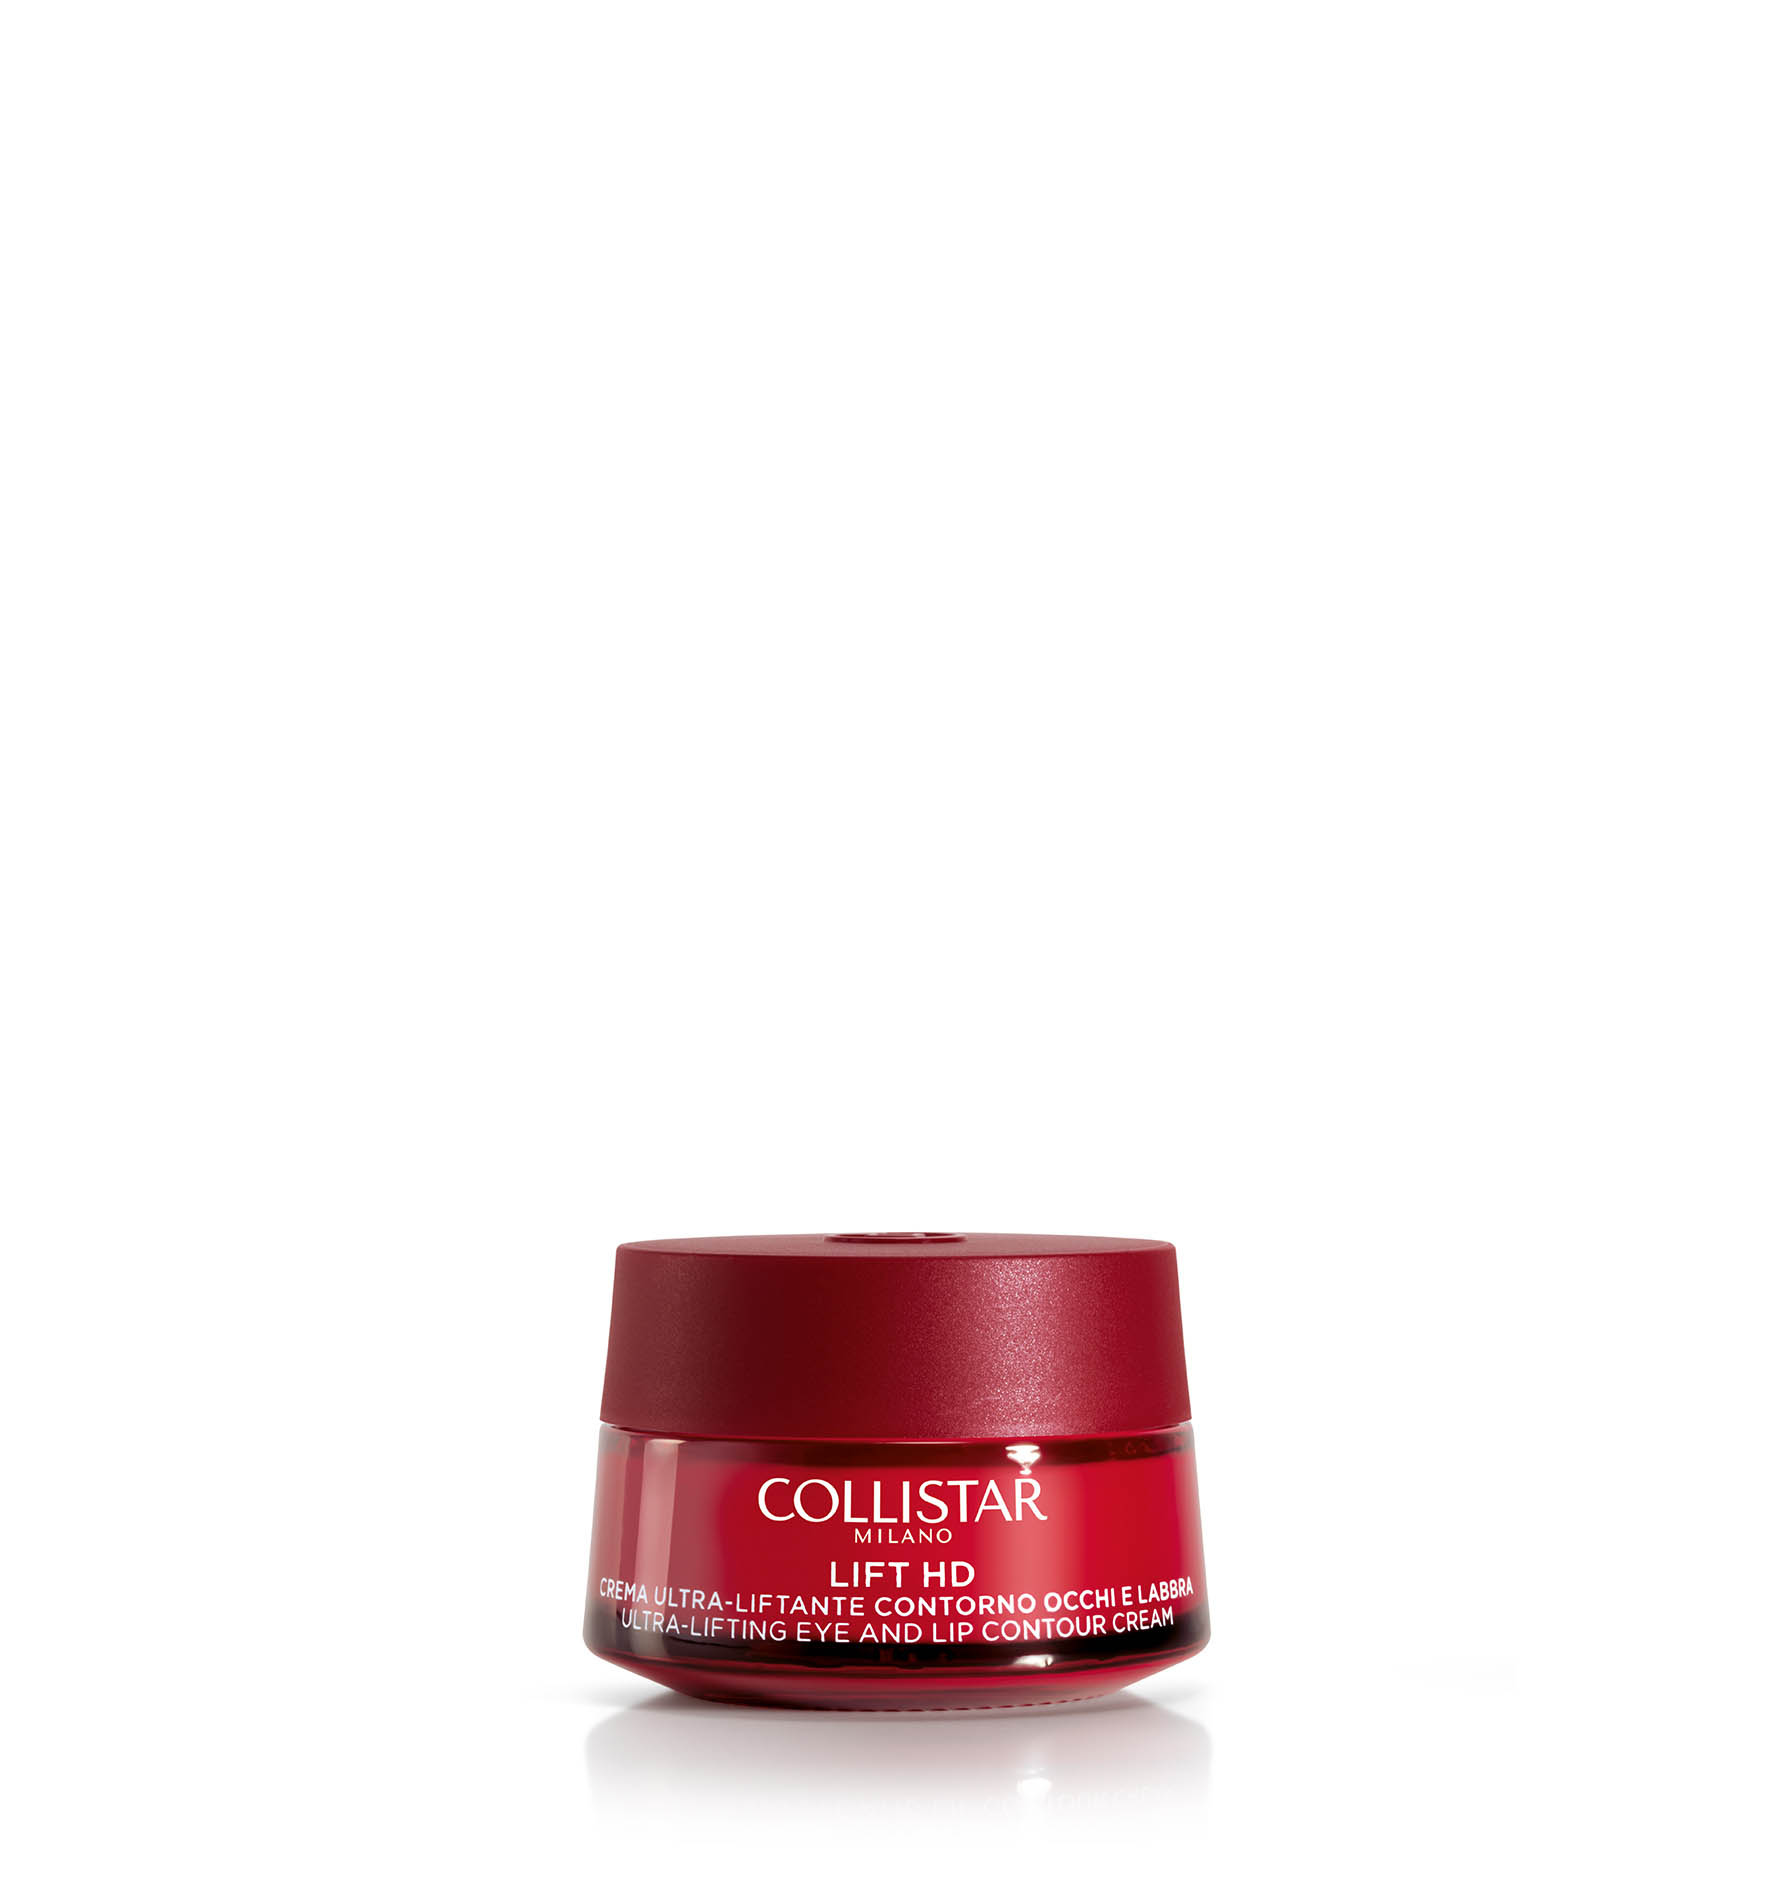 ULTRA-LIFTING EYE AND LIP CONTOUR CREAM - Eye and Lip Contour | Collistar - Shop Online Ufficiale